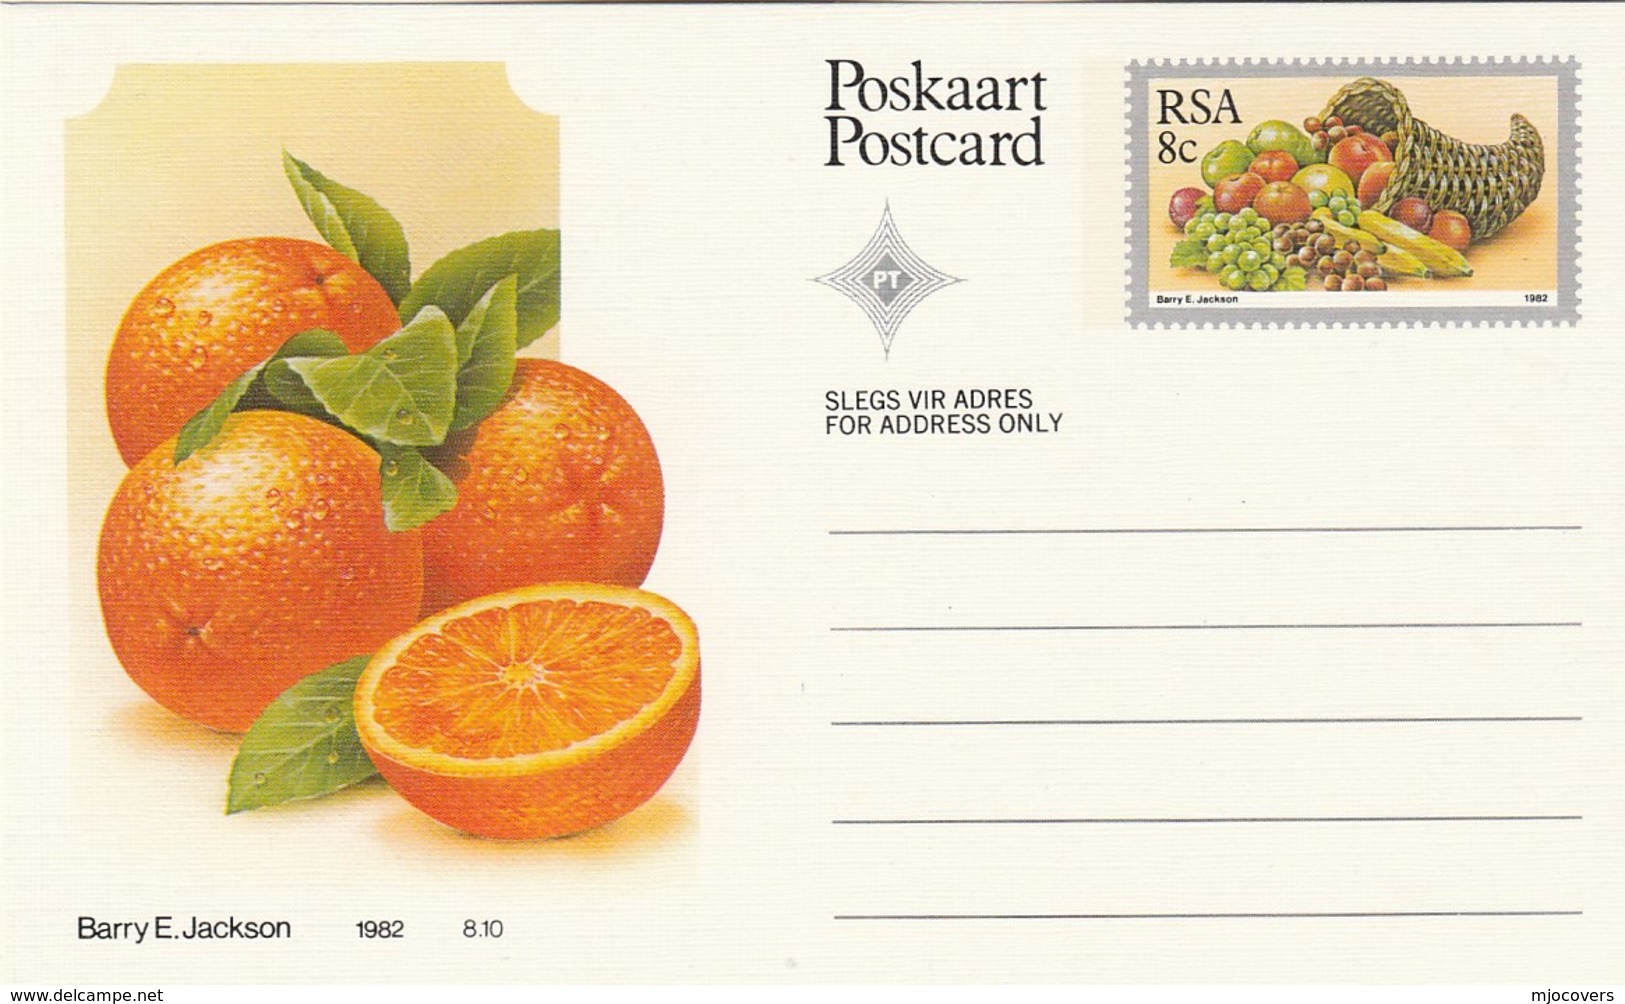 8c SOUTH AFRICA Postal STATIONERY CARD Illus ORANGES FRUIT Cover Stamps Rsa Grapes  Banana - Fruits